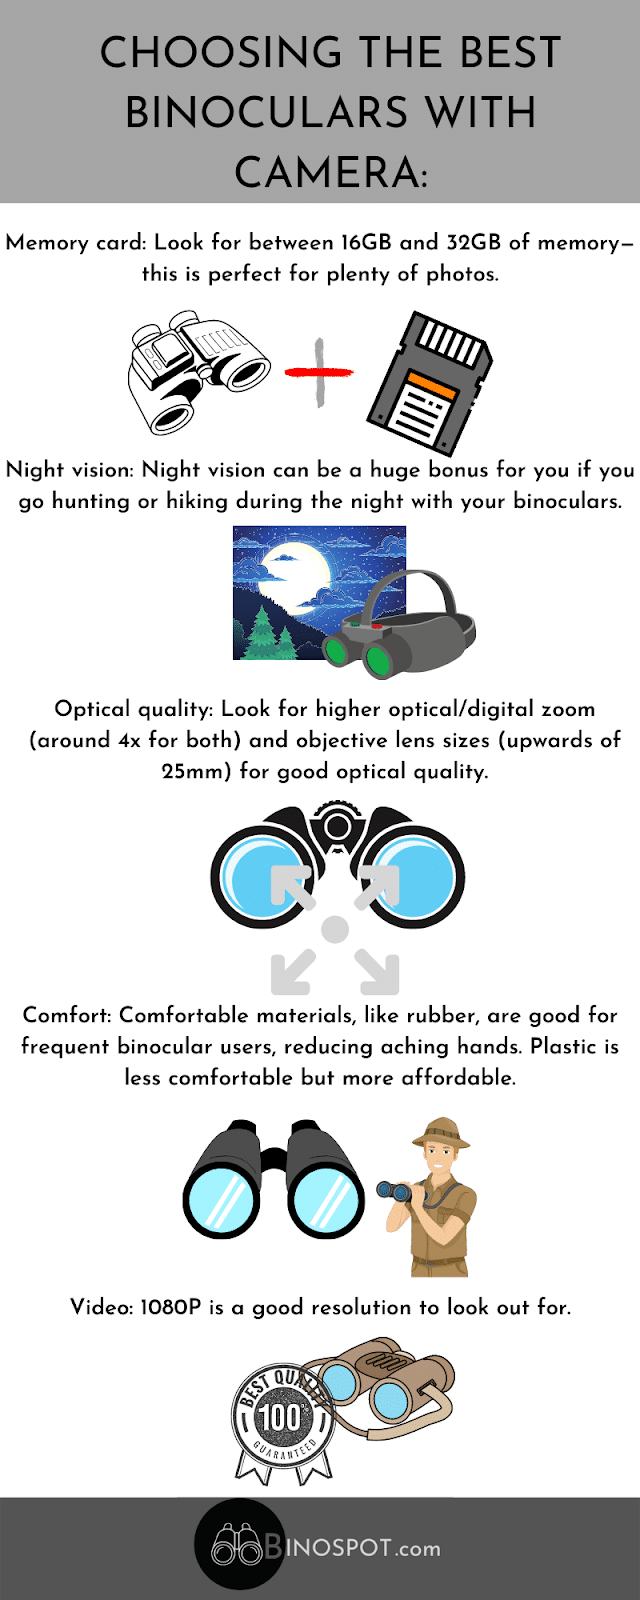 8 Best Binoculars With Camera Reviews infographic